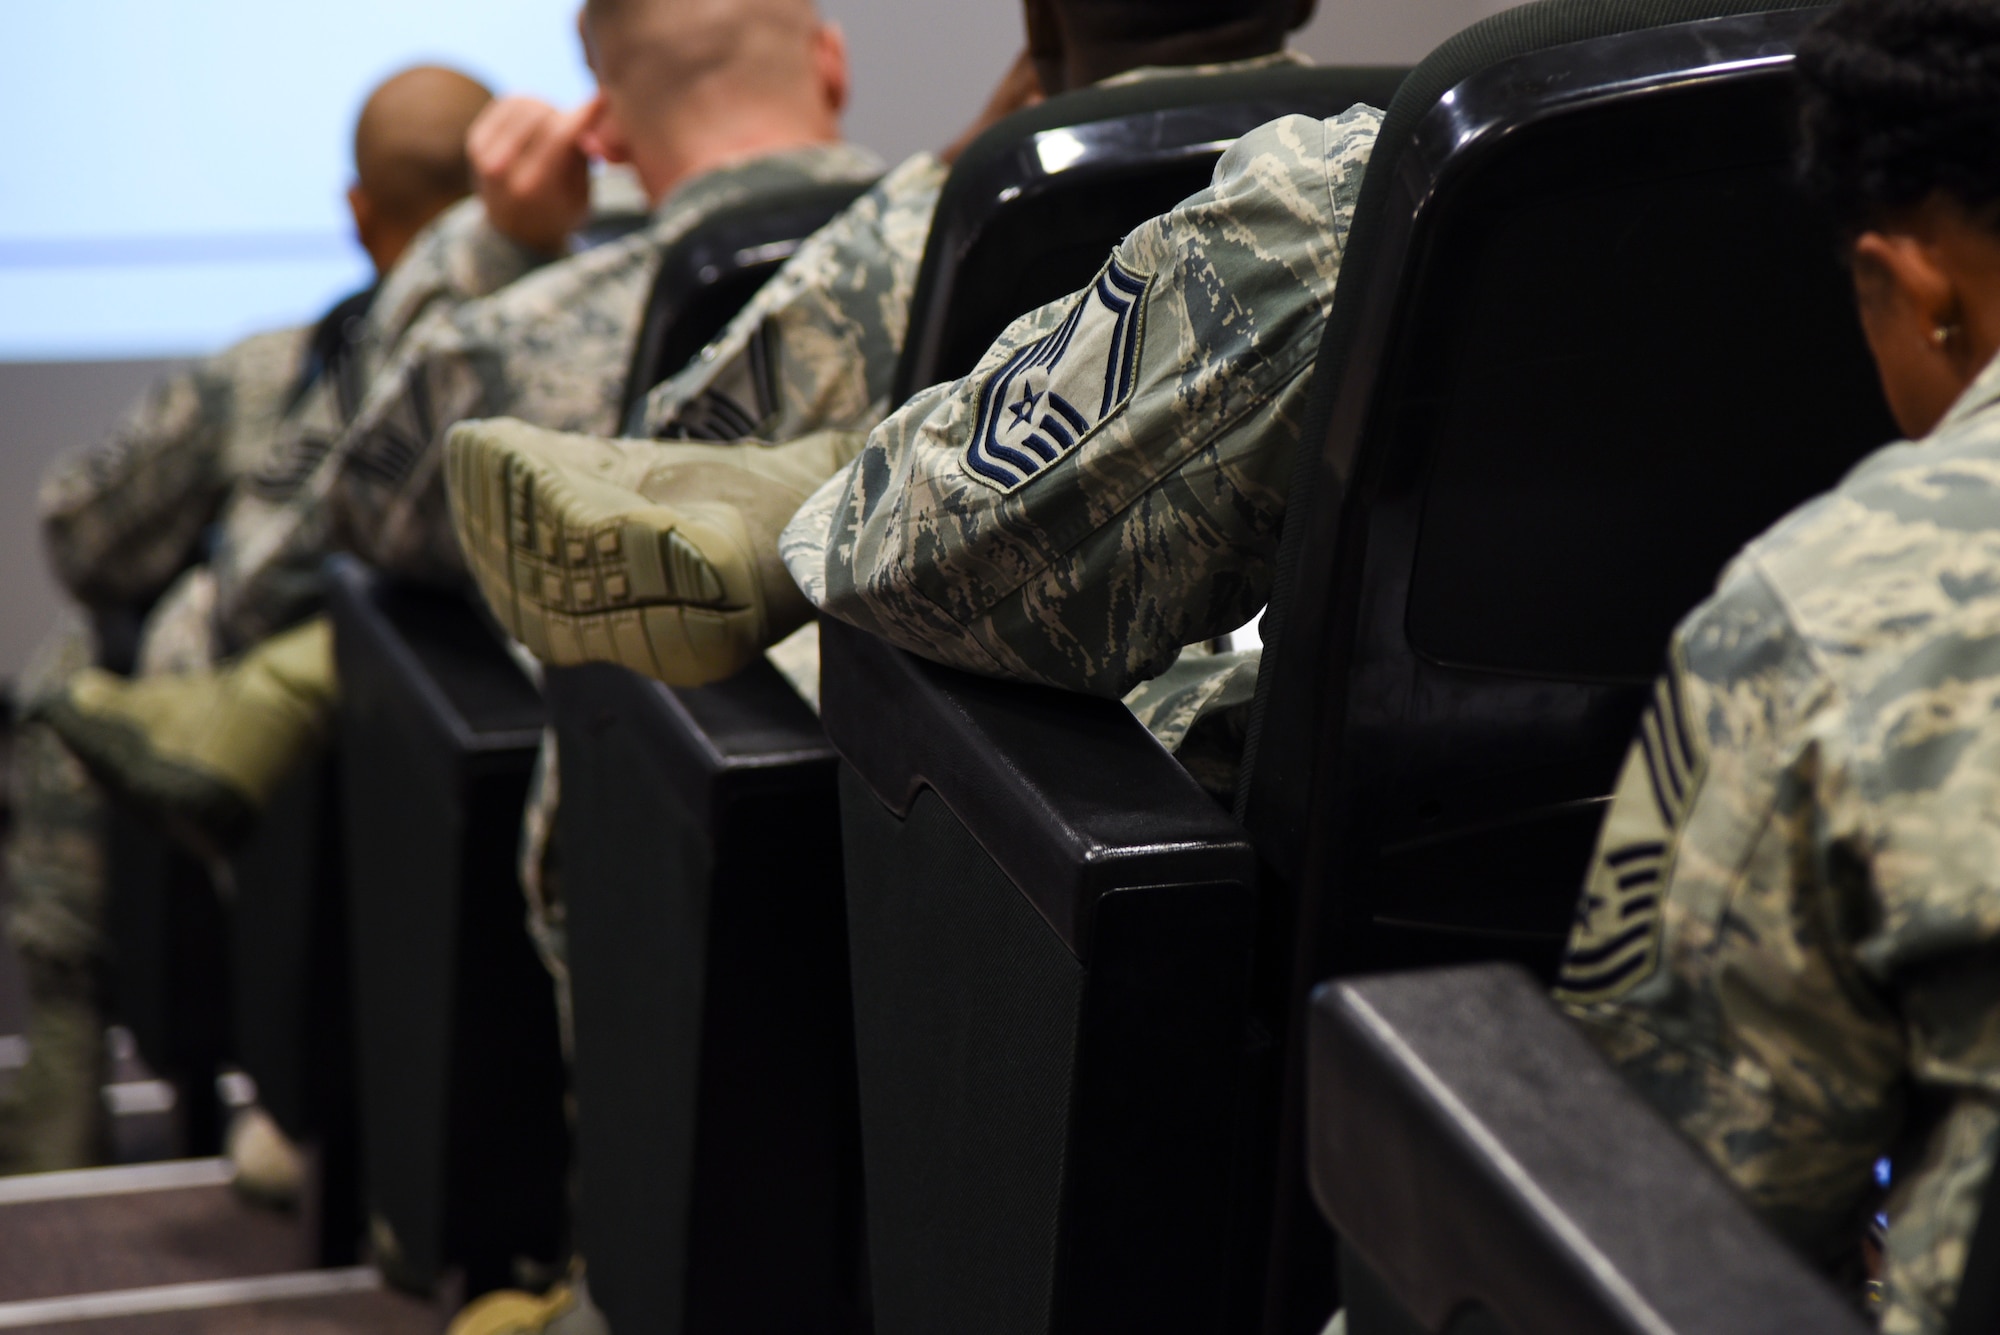 U.S. Air Forces in Europe and U.S. Air Forces Africa Squadron Superintendent and Spouse course attendees wait between briefings at the USAFE conference center on Ramstein Air Base, Germany, Sept. 25, 2018. USAFE leadership recognized the need for training at the superintendent level and created the course geared towards superintendents who have been in the position less than a year and those who have been vectored toward the job. (U.S. Air Force photo by Airman D. Blake Browning)